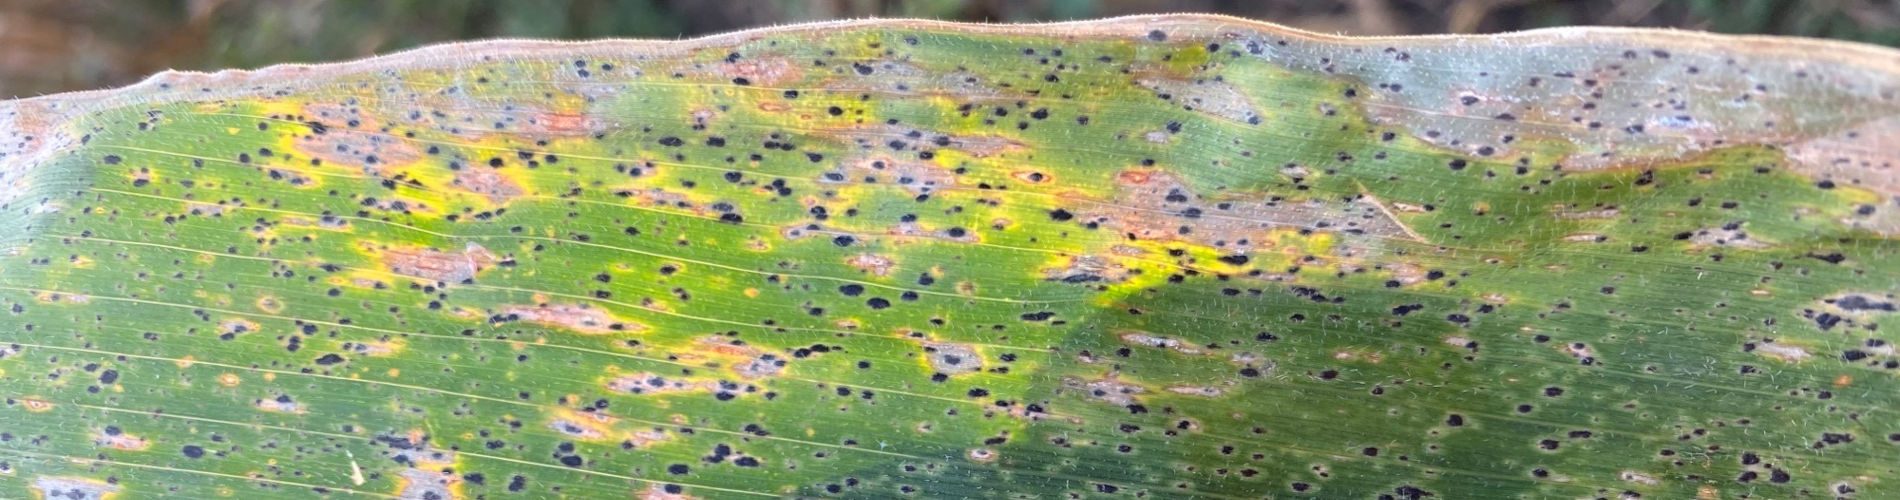 The presence of corn tar spot has been increasing over the years. learn what you can do to manage it and how adjuvants help.